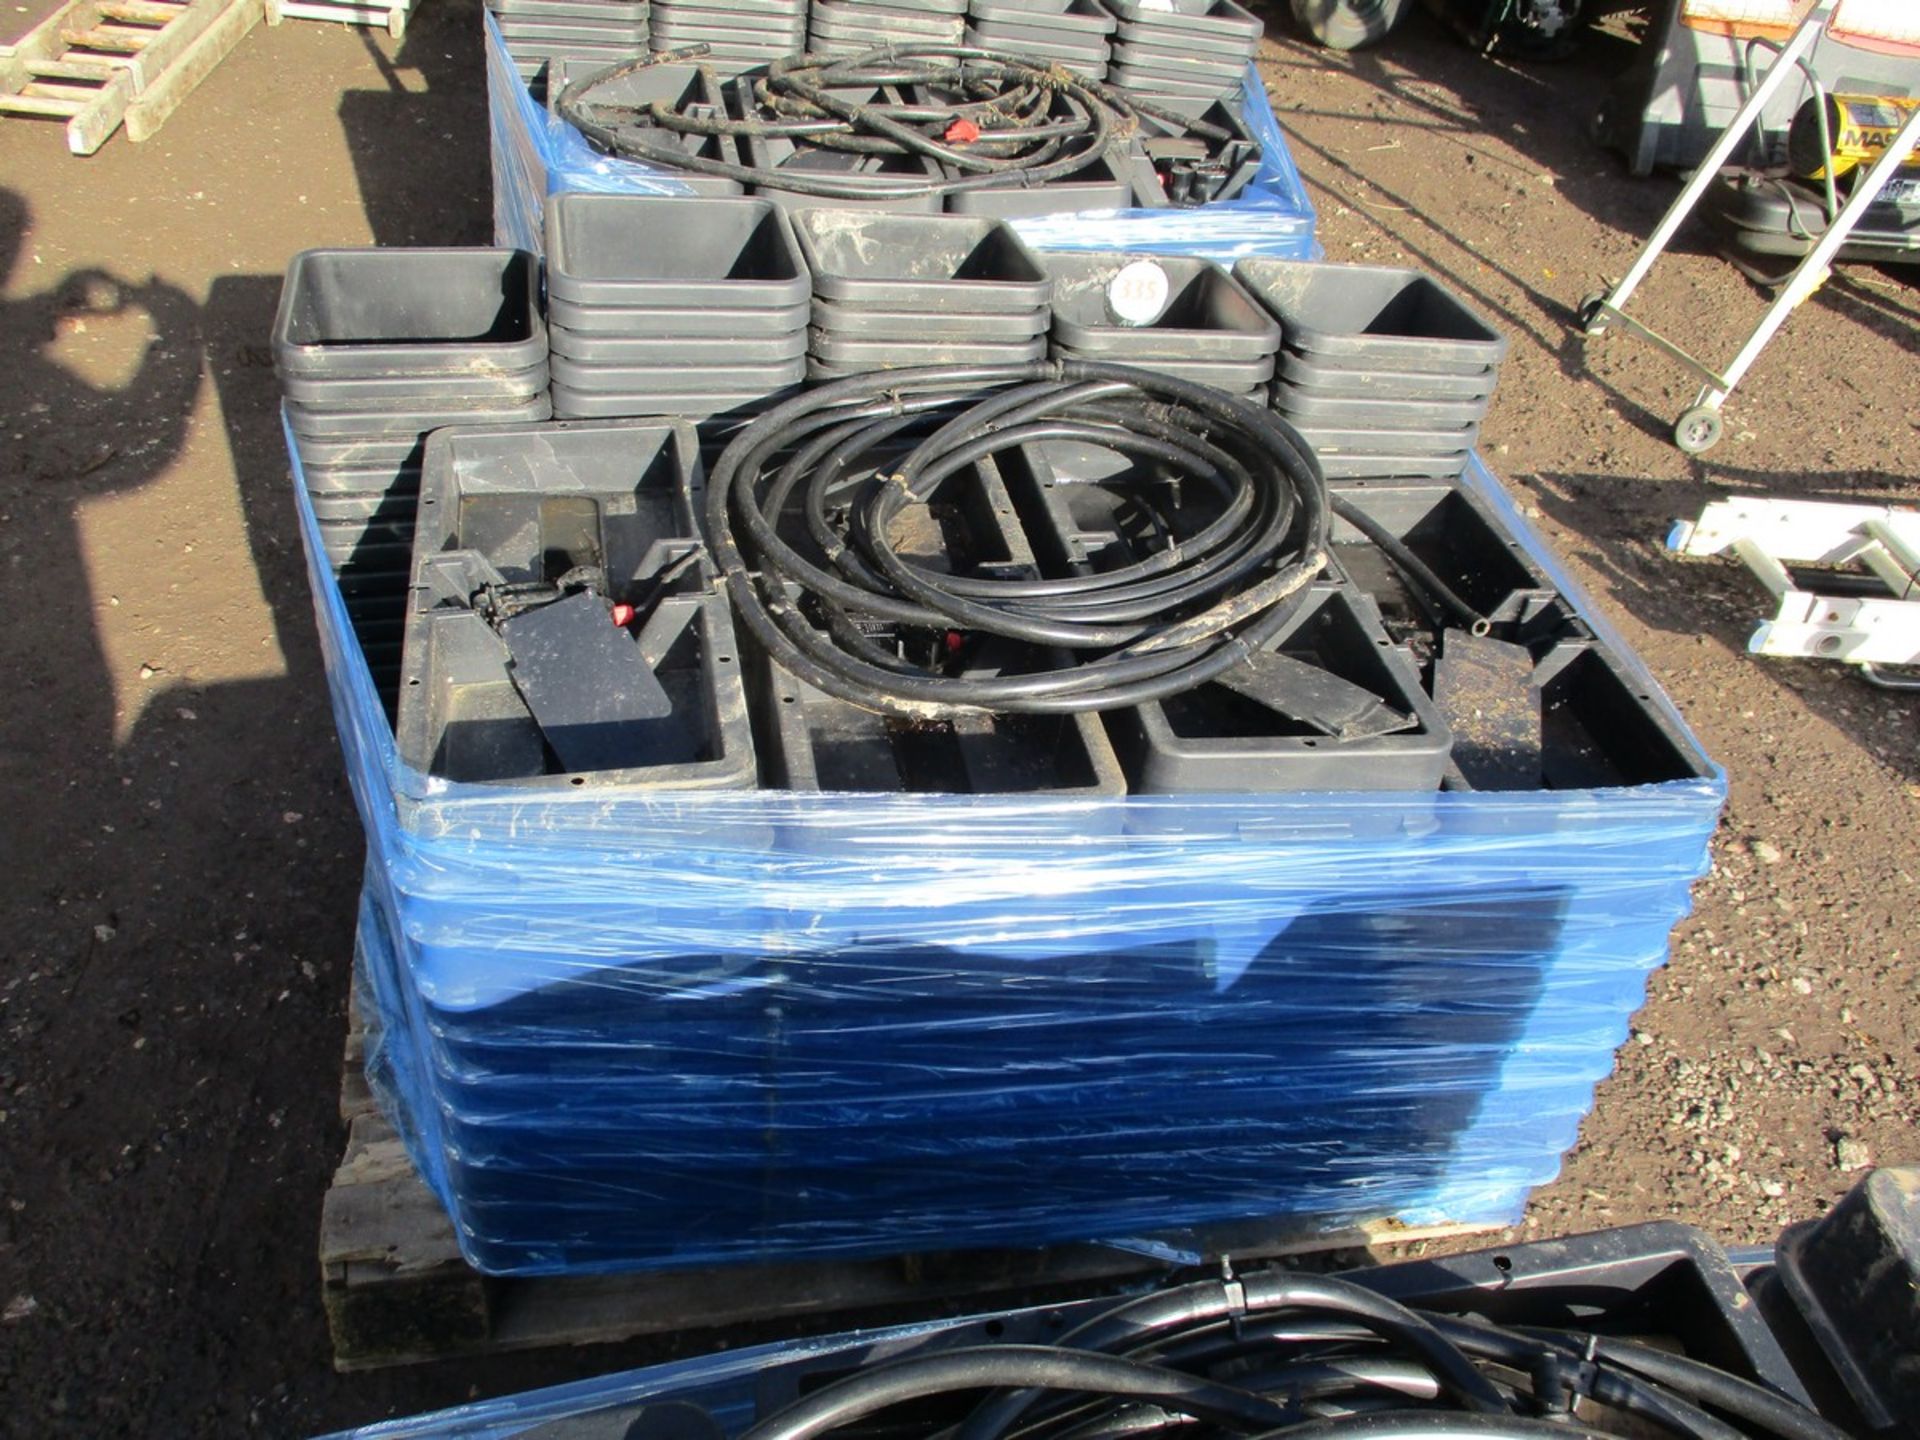 AUTO POTS 40 TRAYS 80 POTS C.W PIPEWORK 8.5 LITRE POTS TRAYS WITH FLOATS (NEW PRICE £450)